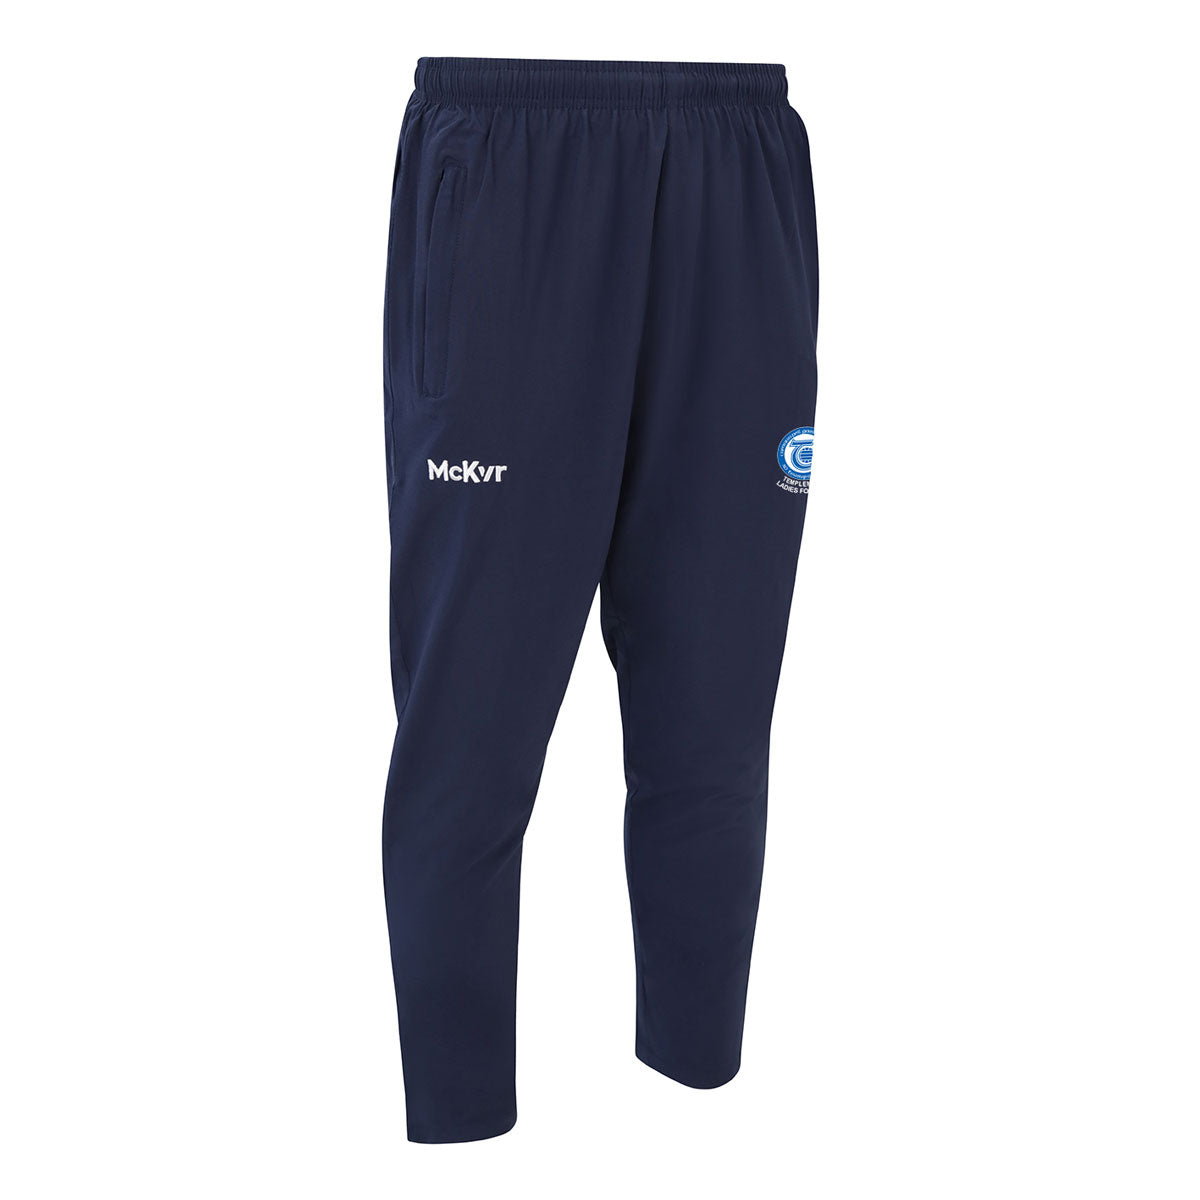 Mc Keever Templemore Ladies GFC Core 22 Tapered Pants - Adult - Navy